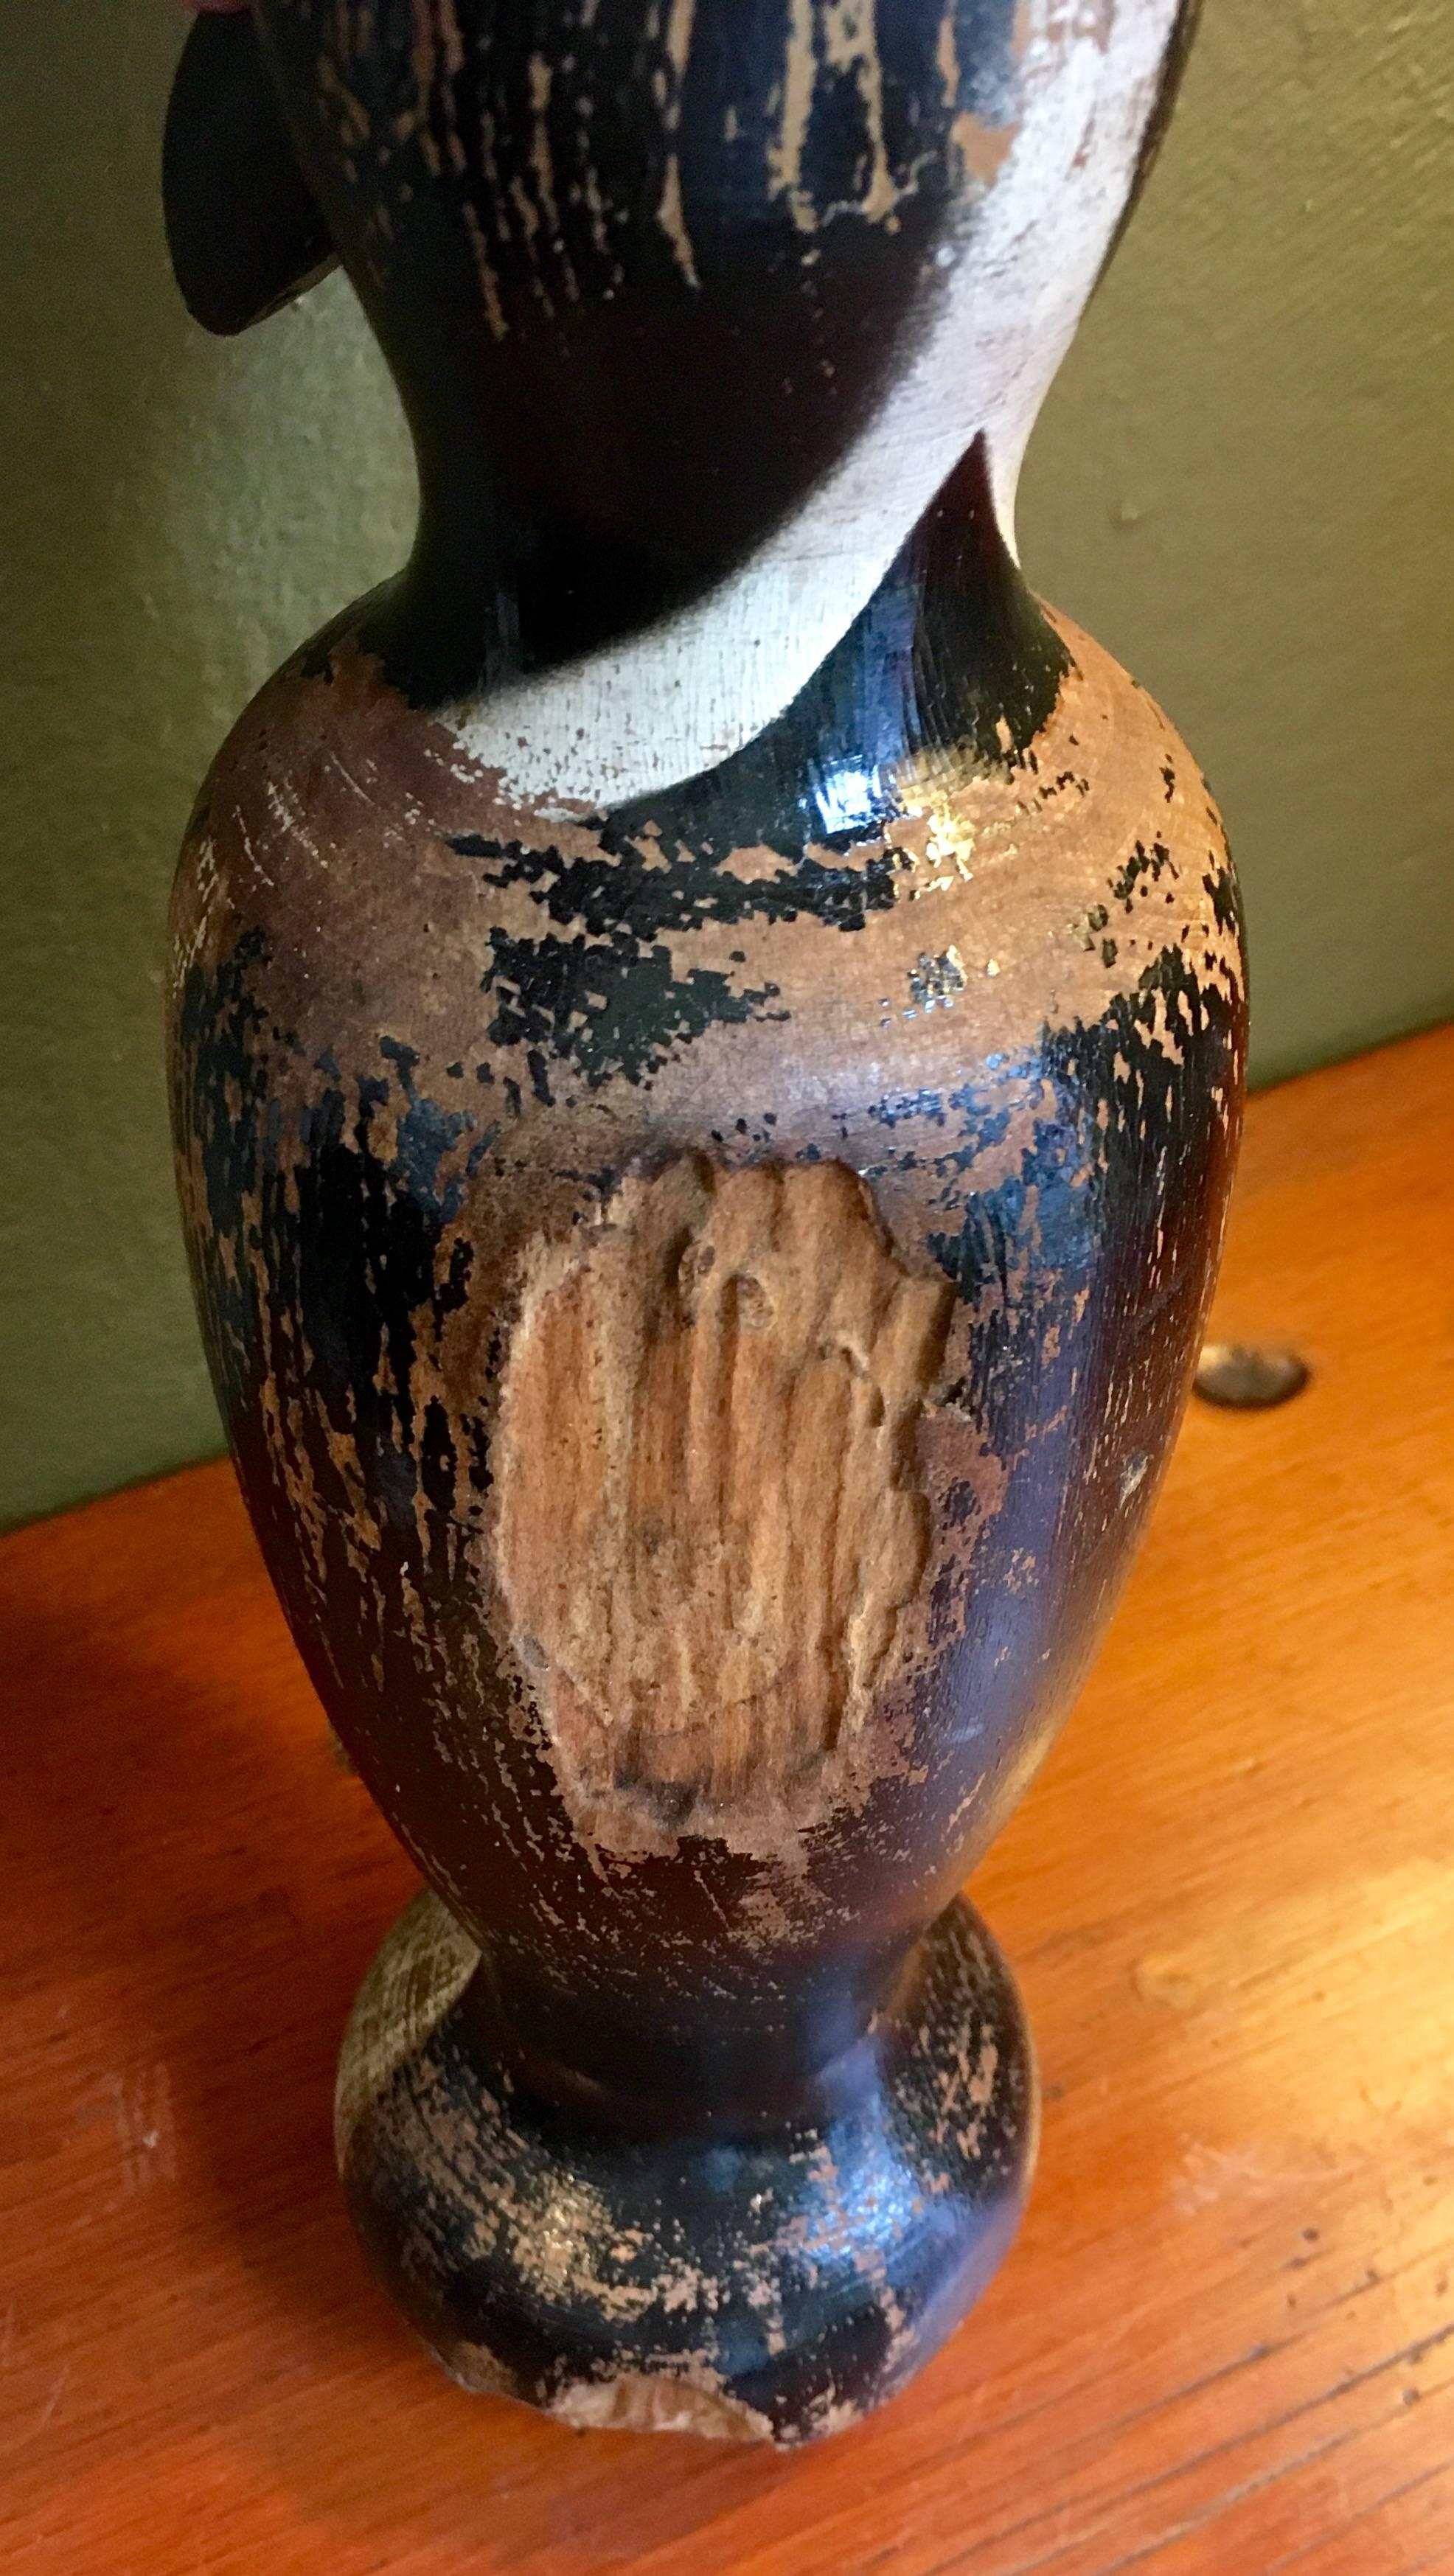 Folk Art carved and decorated whimsical penguin bowling pin, patented in 1922. Chipped areas and paint loss from use. Great folky look.
      